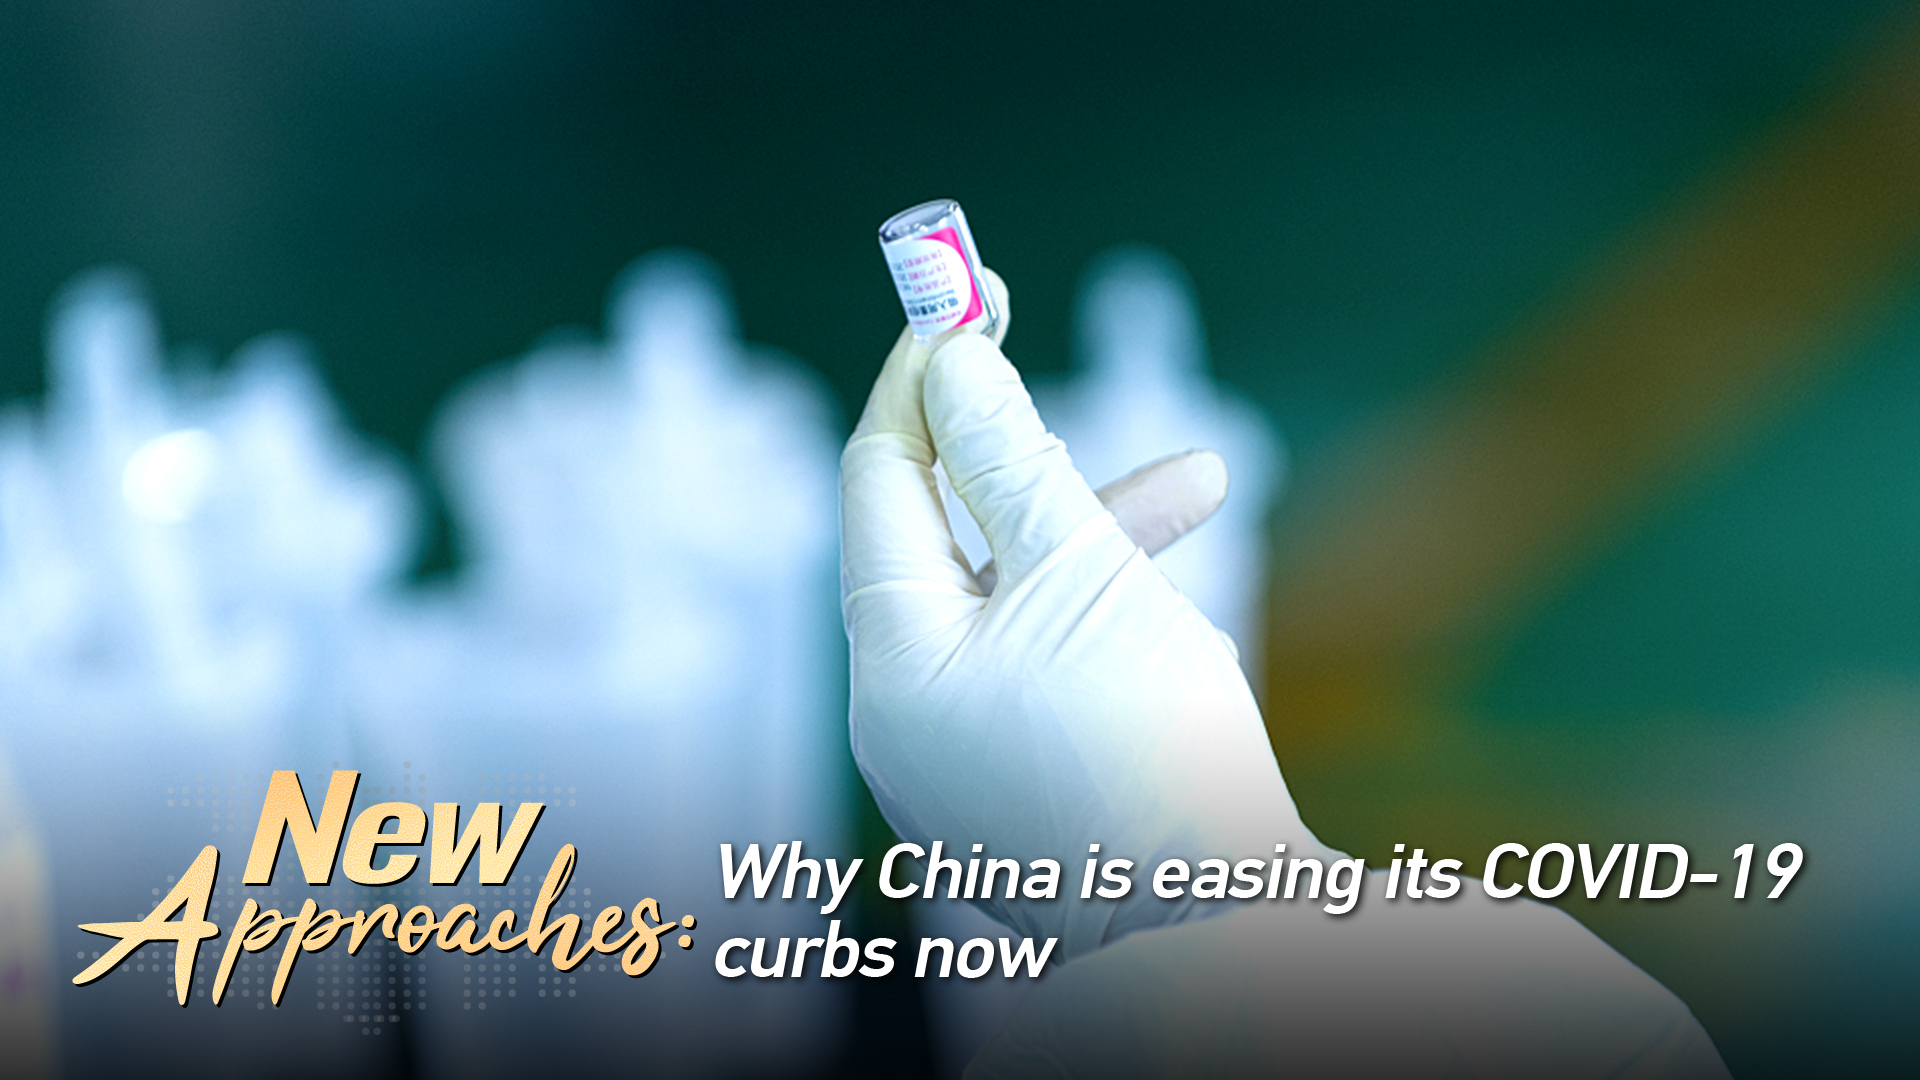 New Approaches: Why China is easing its COVID-19 curbs now